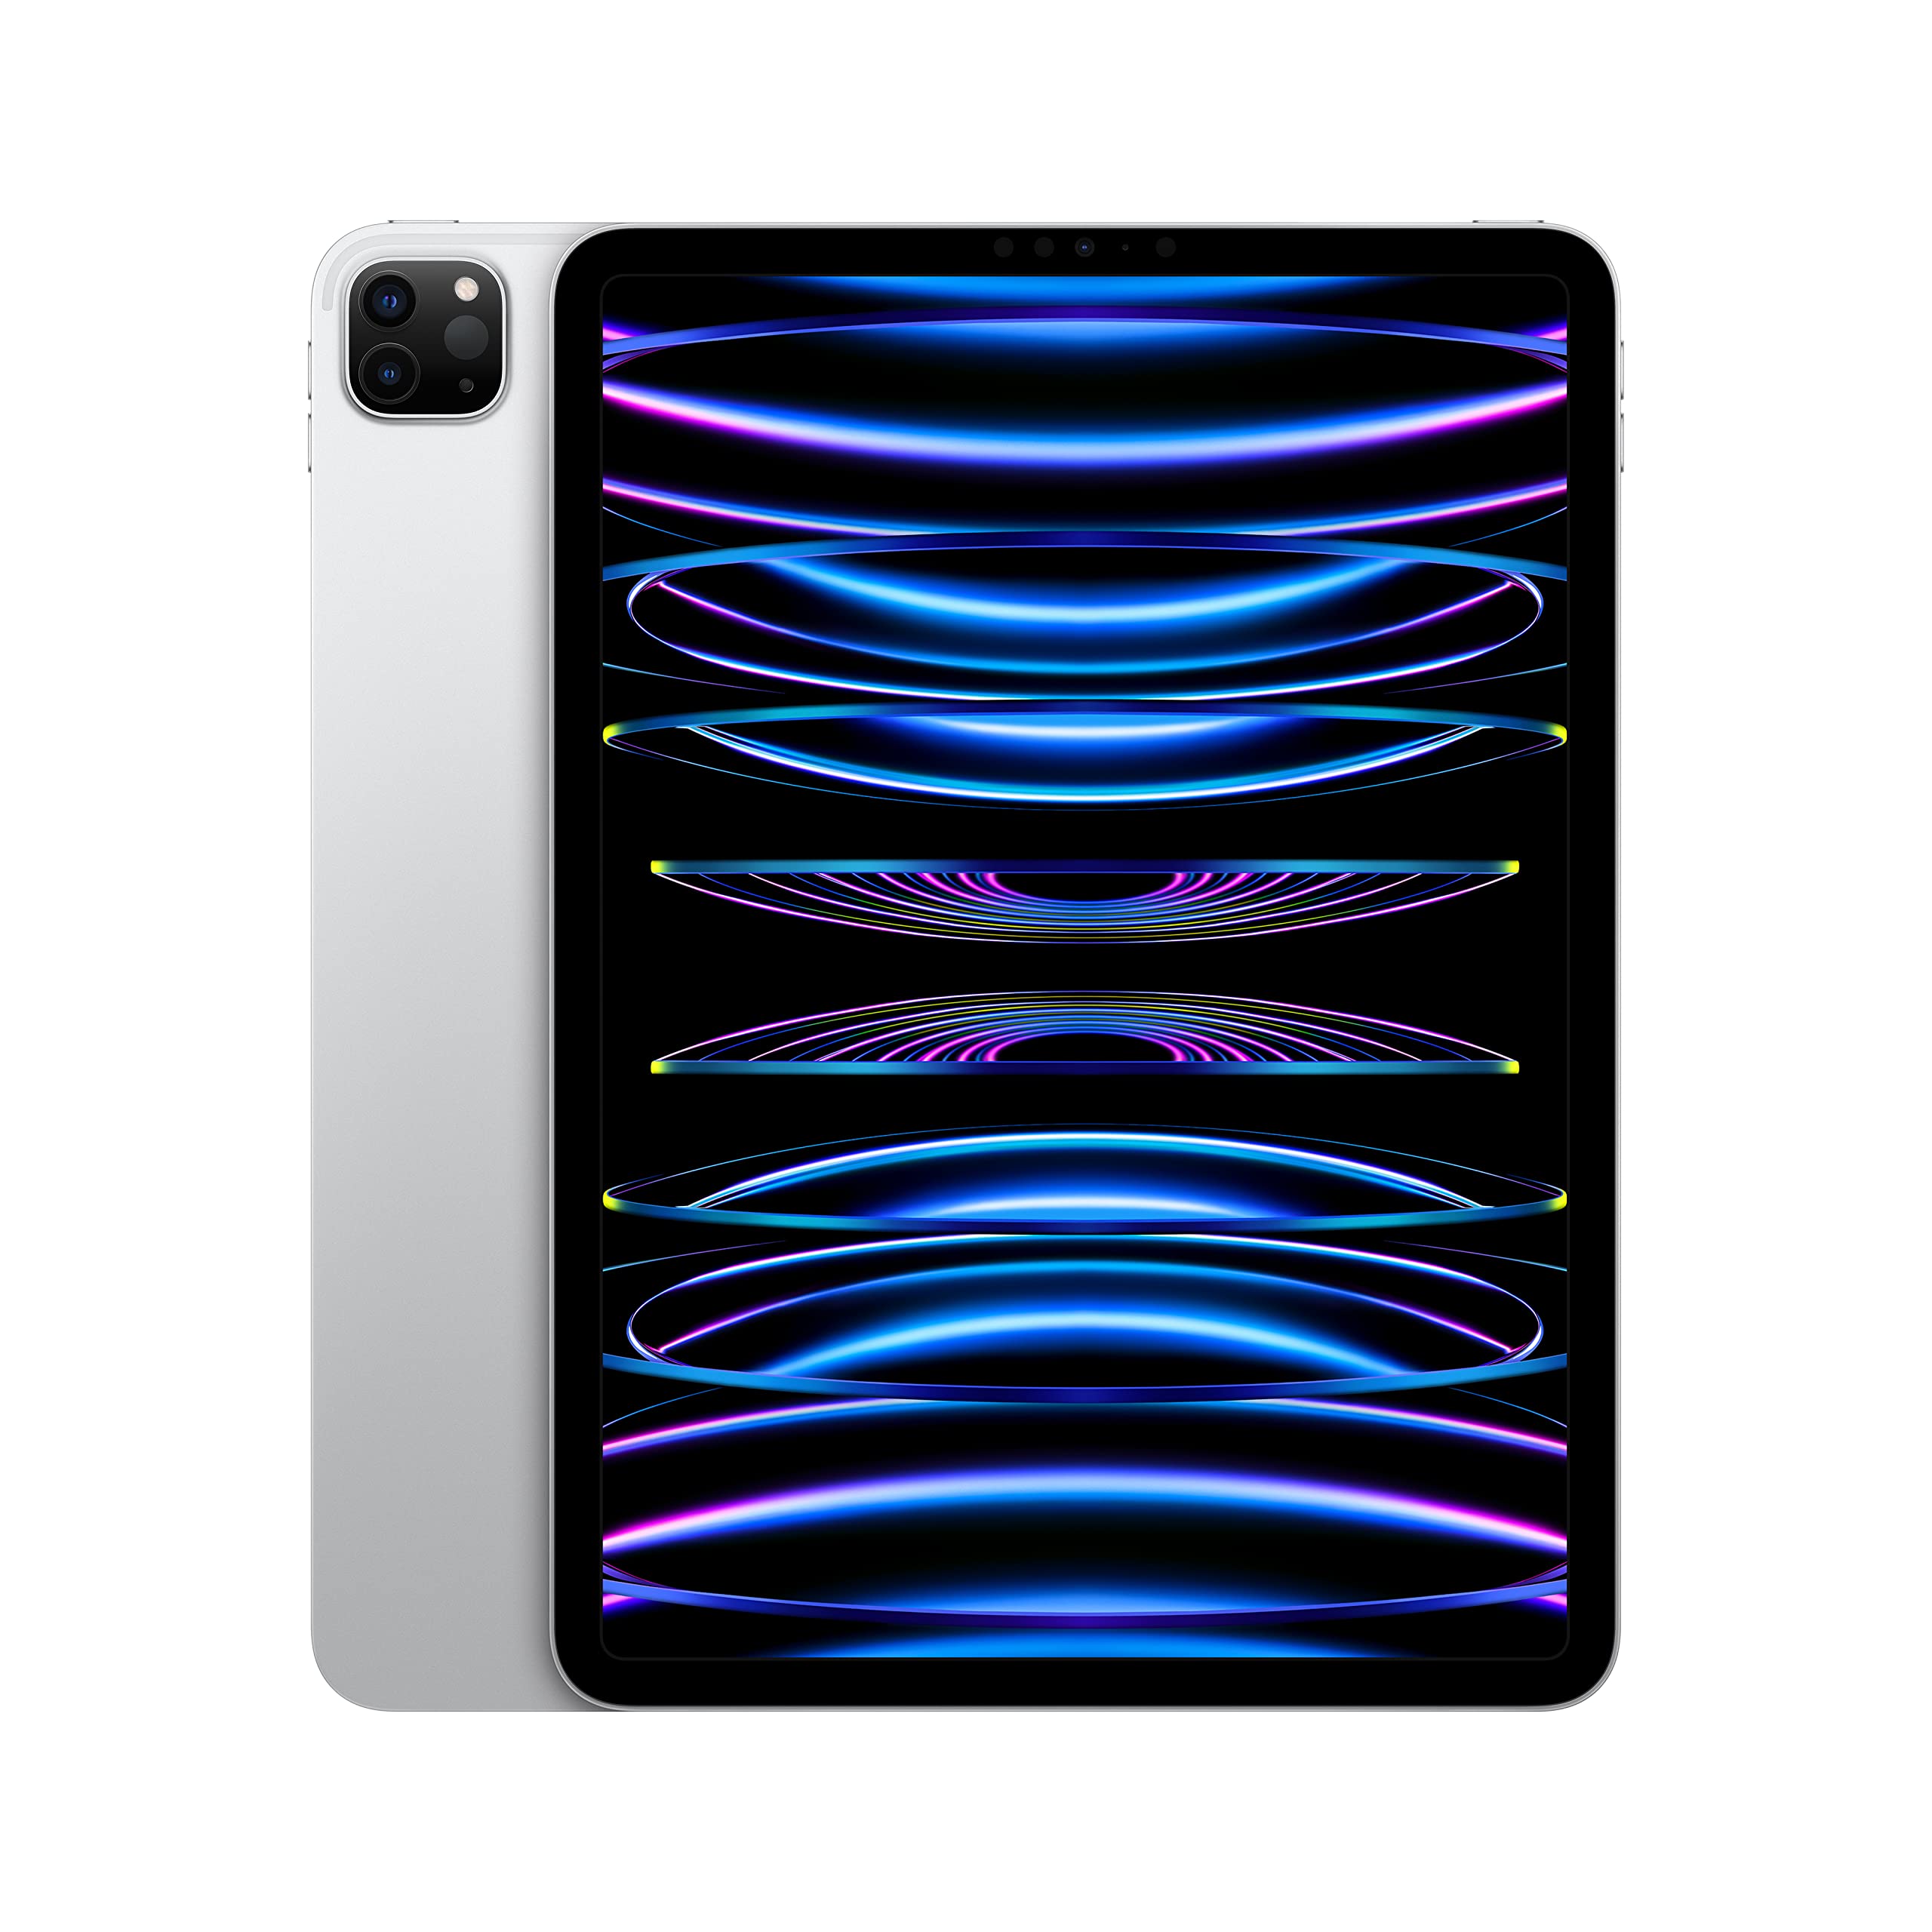 Apple iPad Pro 11-inch (4th Generation): with M2 chip, Liquid Retina Display, 512GB, Wi-Fi 6E, 12MP front/12MP and 10MP Back Cameras, Face ID, All-Day Battery Life – Silver